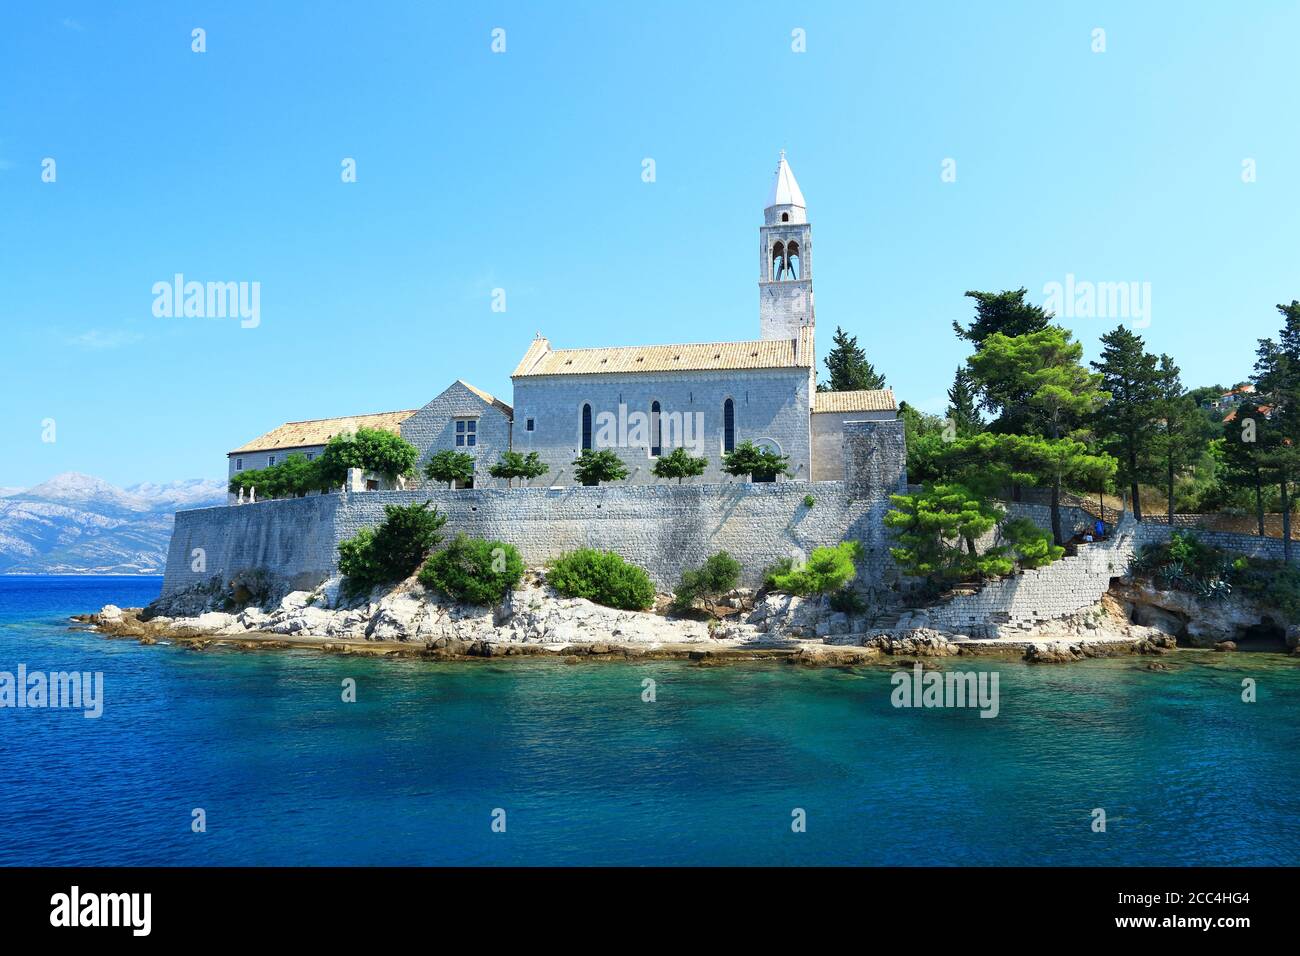 Old stone church and Franciscan monastery on island Lopud near Dubrovnik, famous touristic destination in Croatia Stock Photo